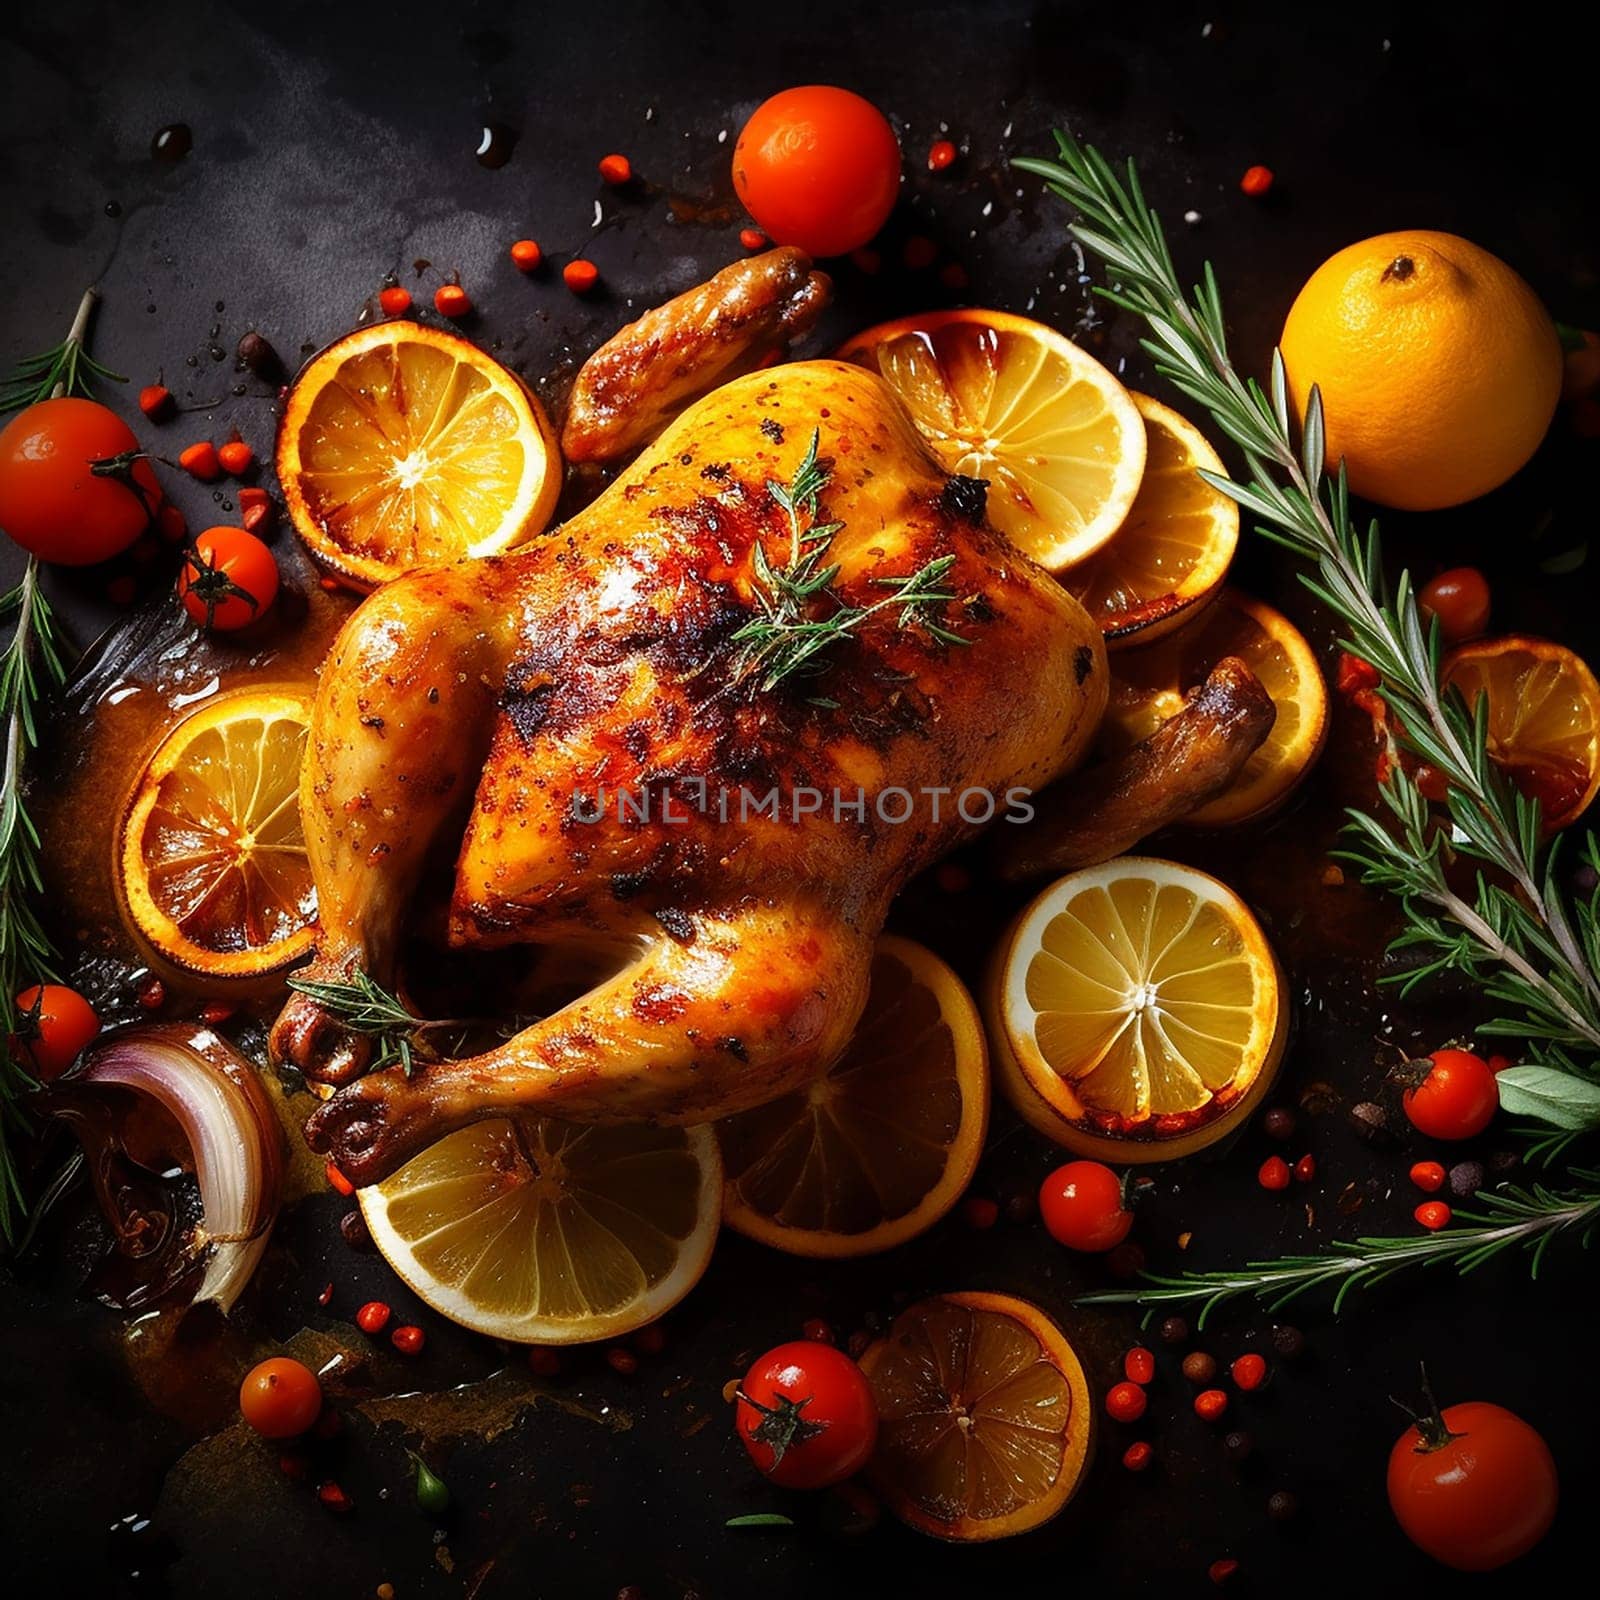 Roasted chicken garnished with citrus and herbs on dark surface.